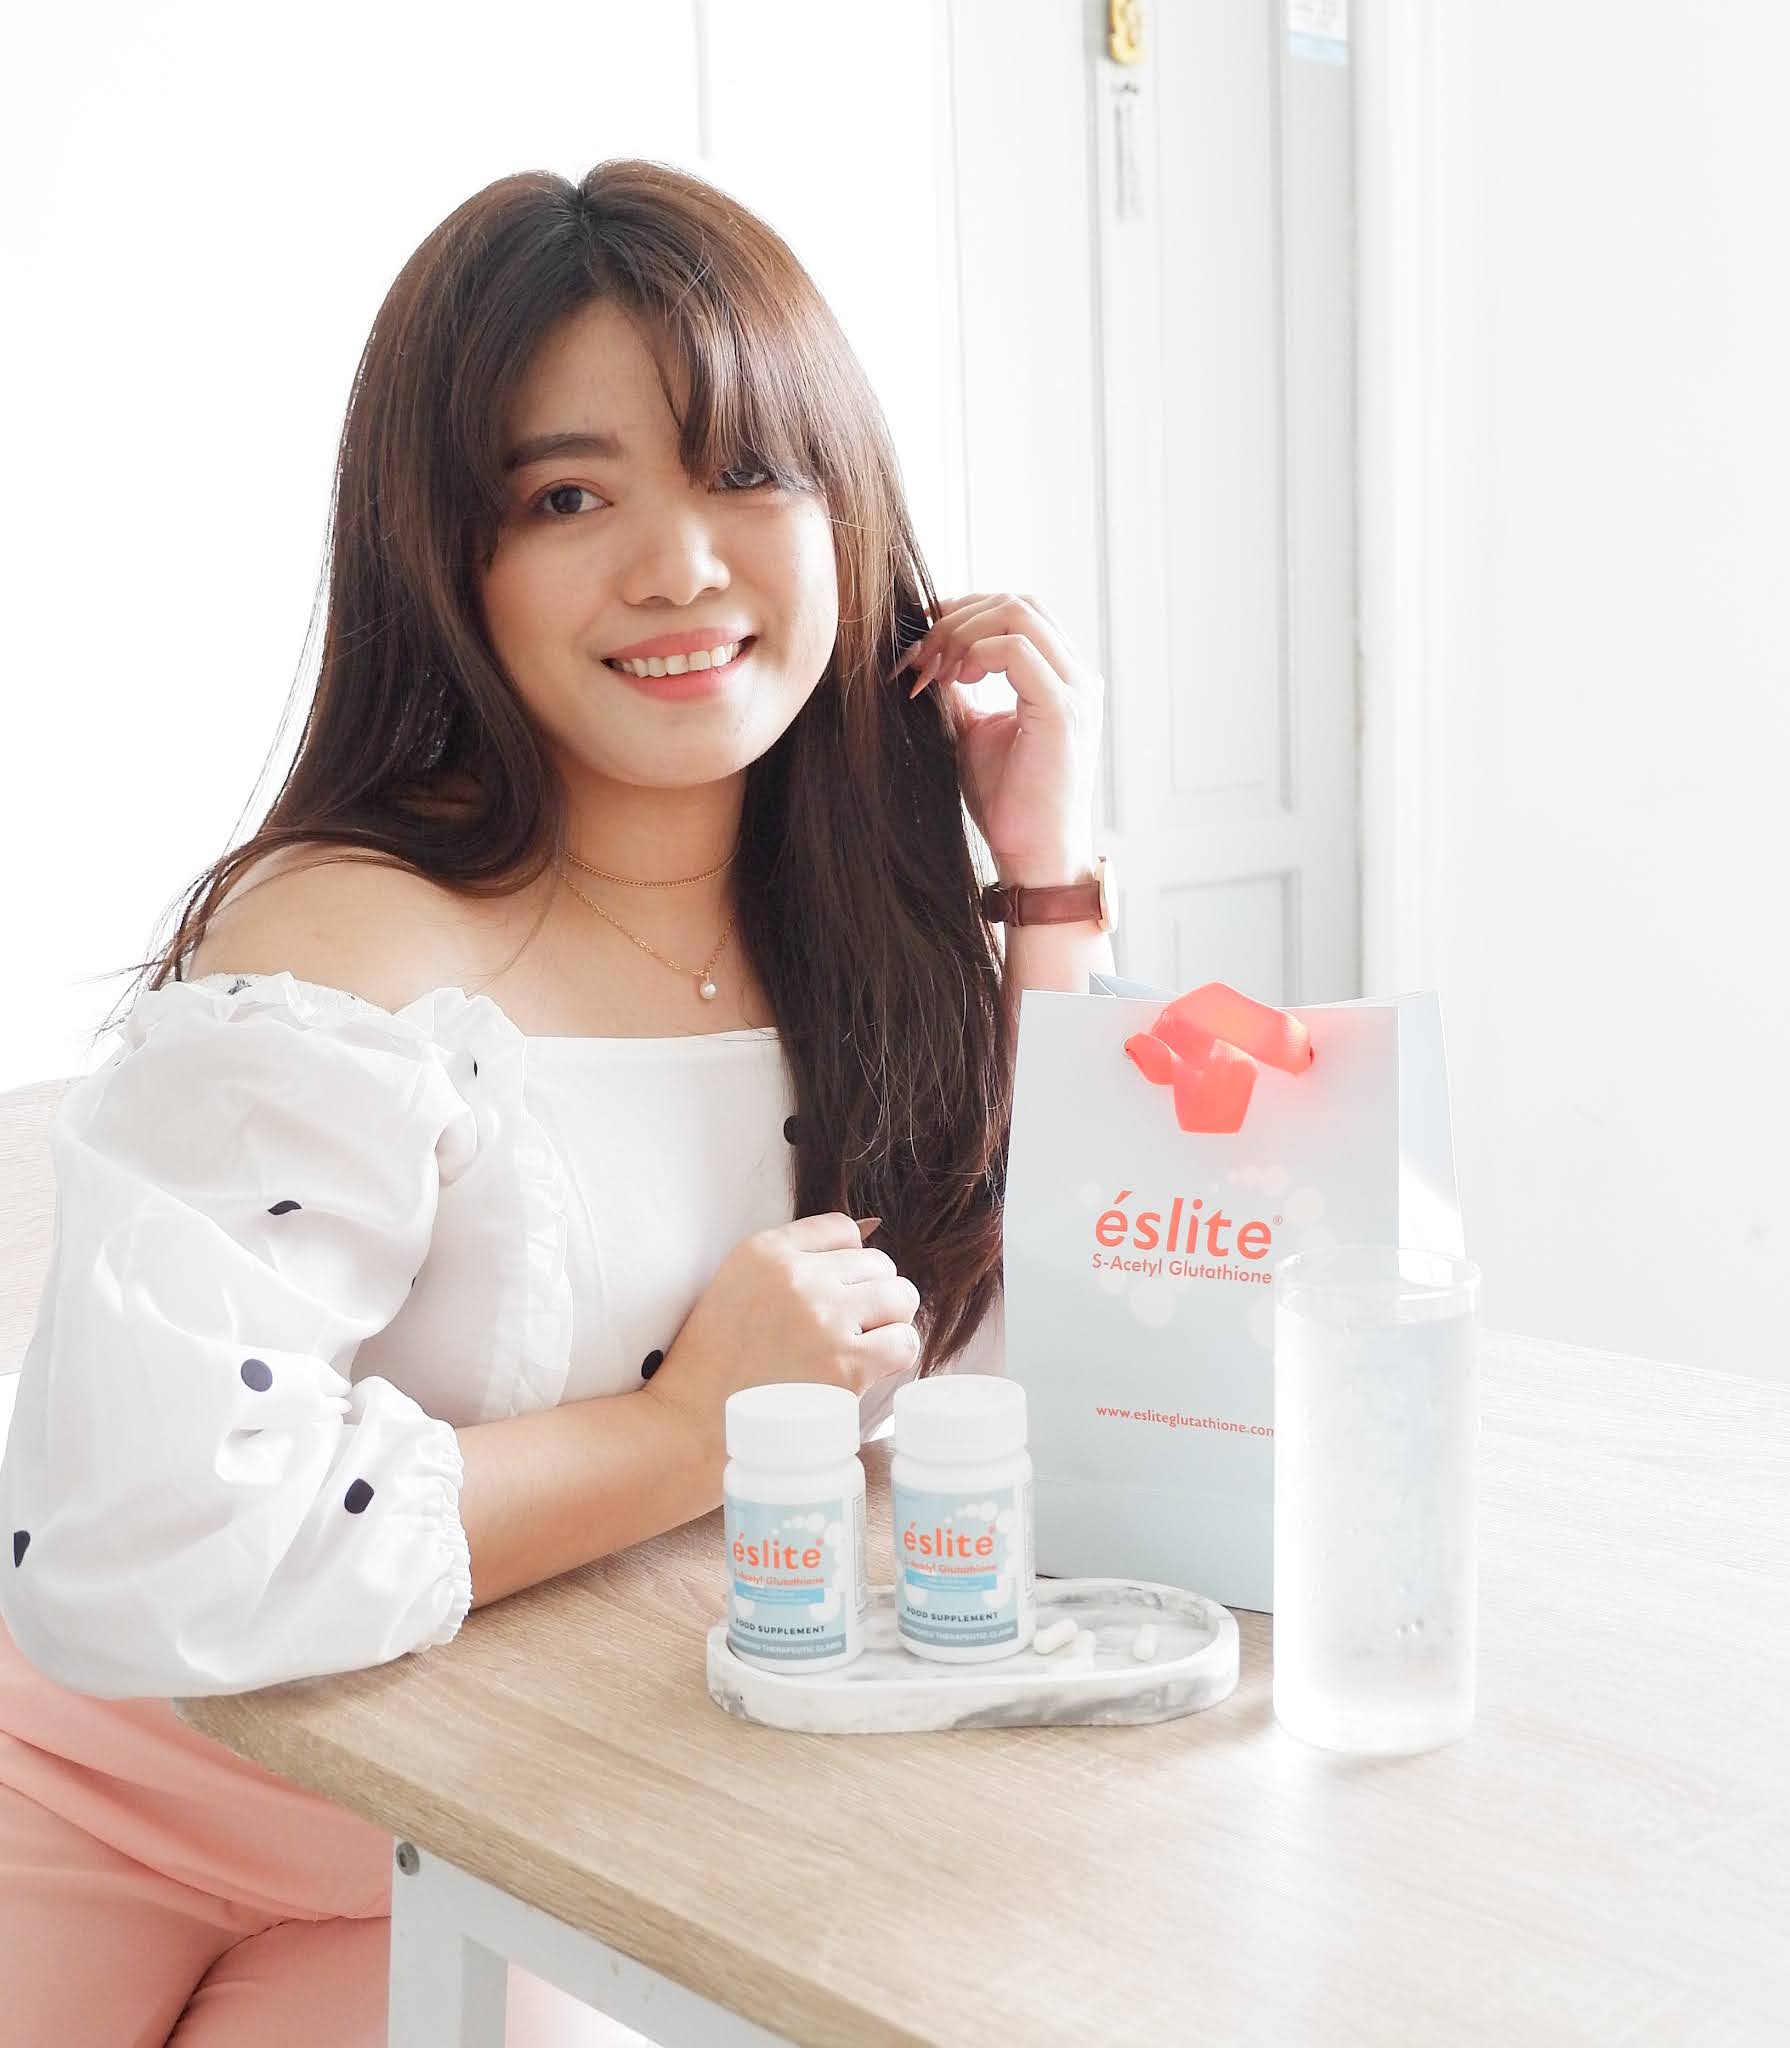 Eslite Glutathione: The Newest Revolution to Wellness and Anti-Aging